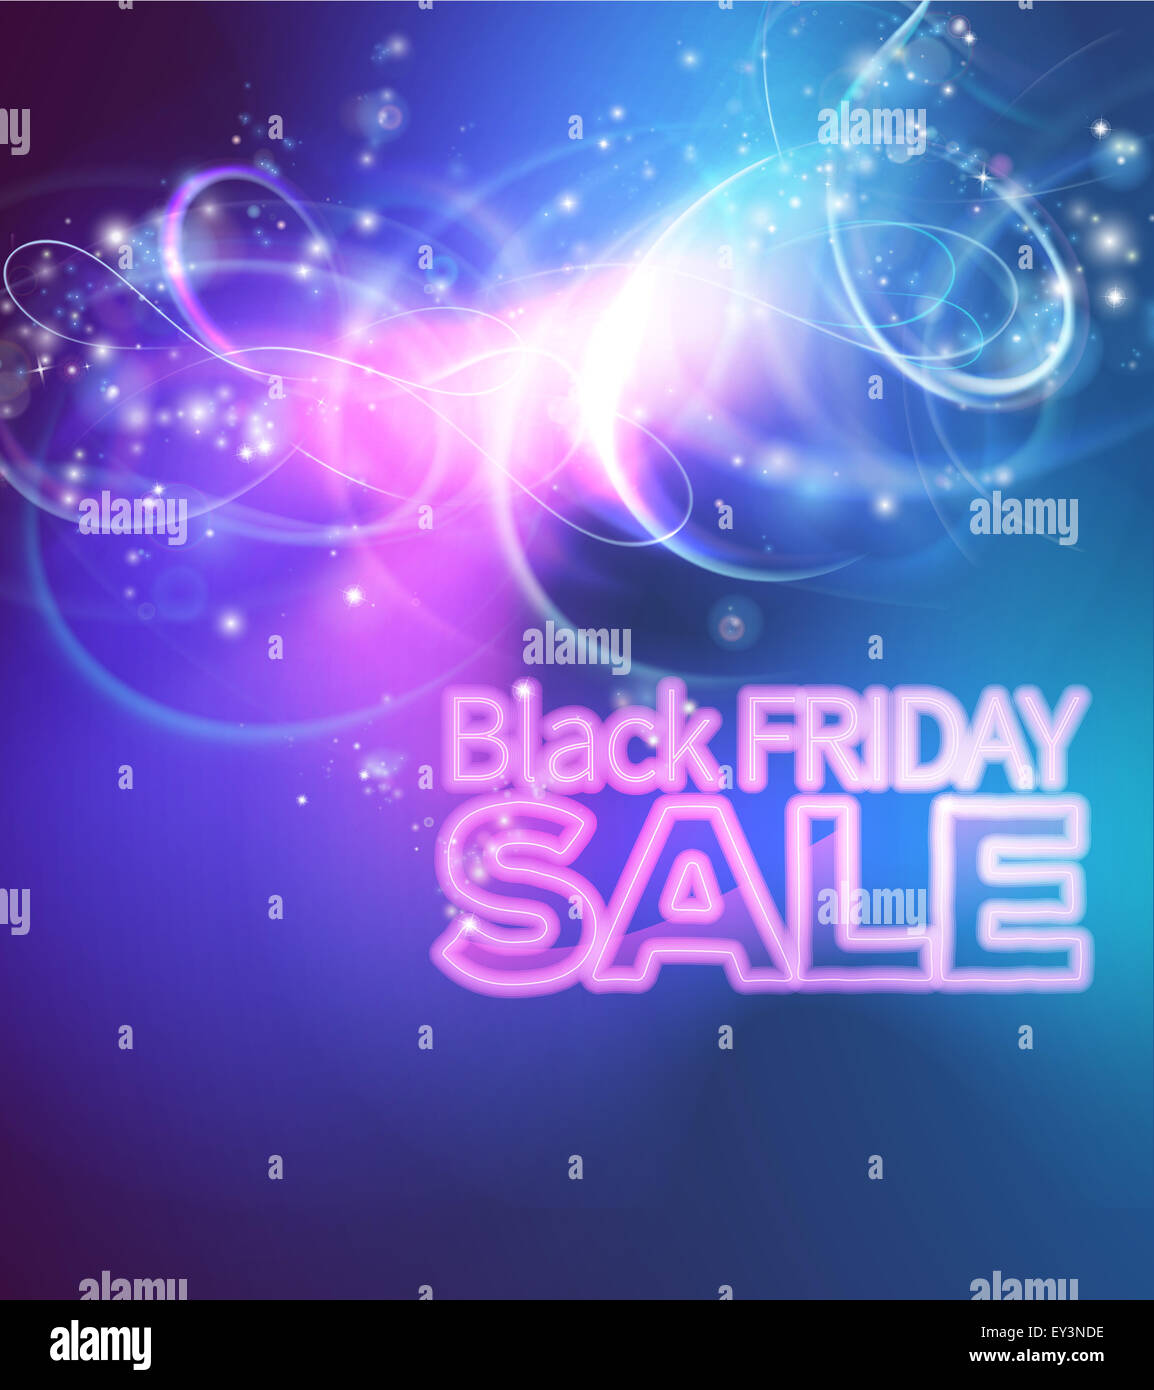 Black Friday Sale background with Black Friday SALE neon text Stock Photo